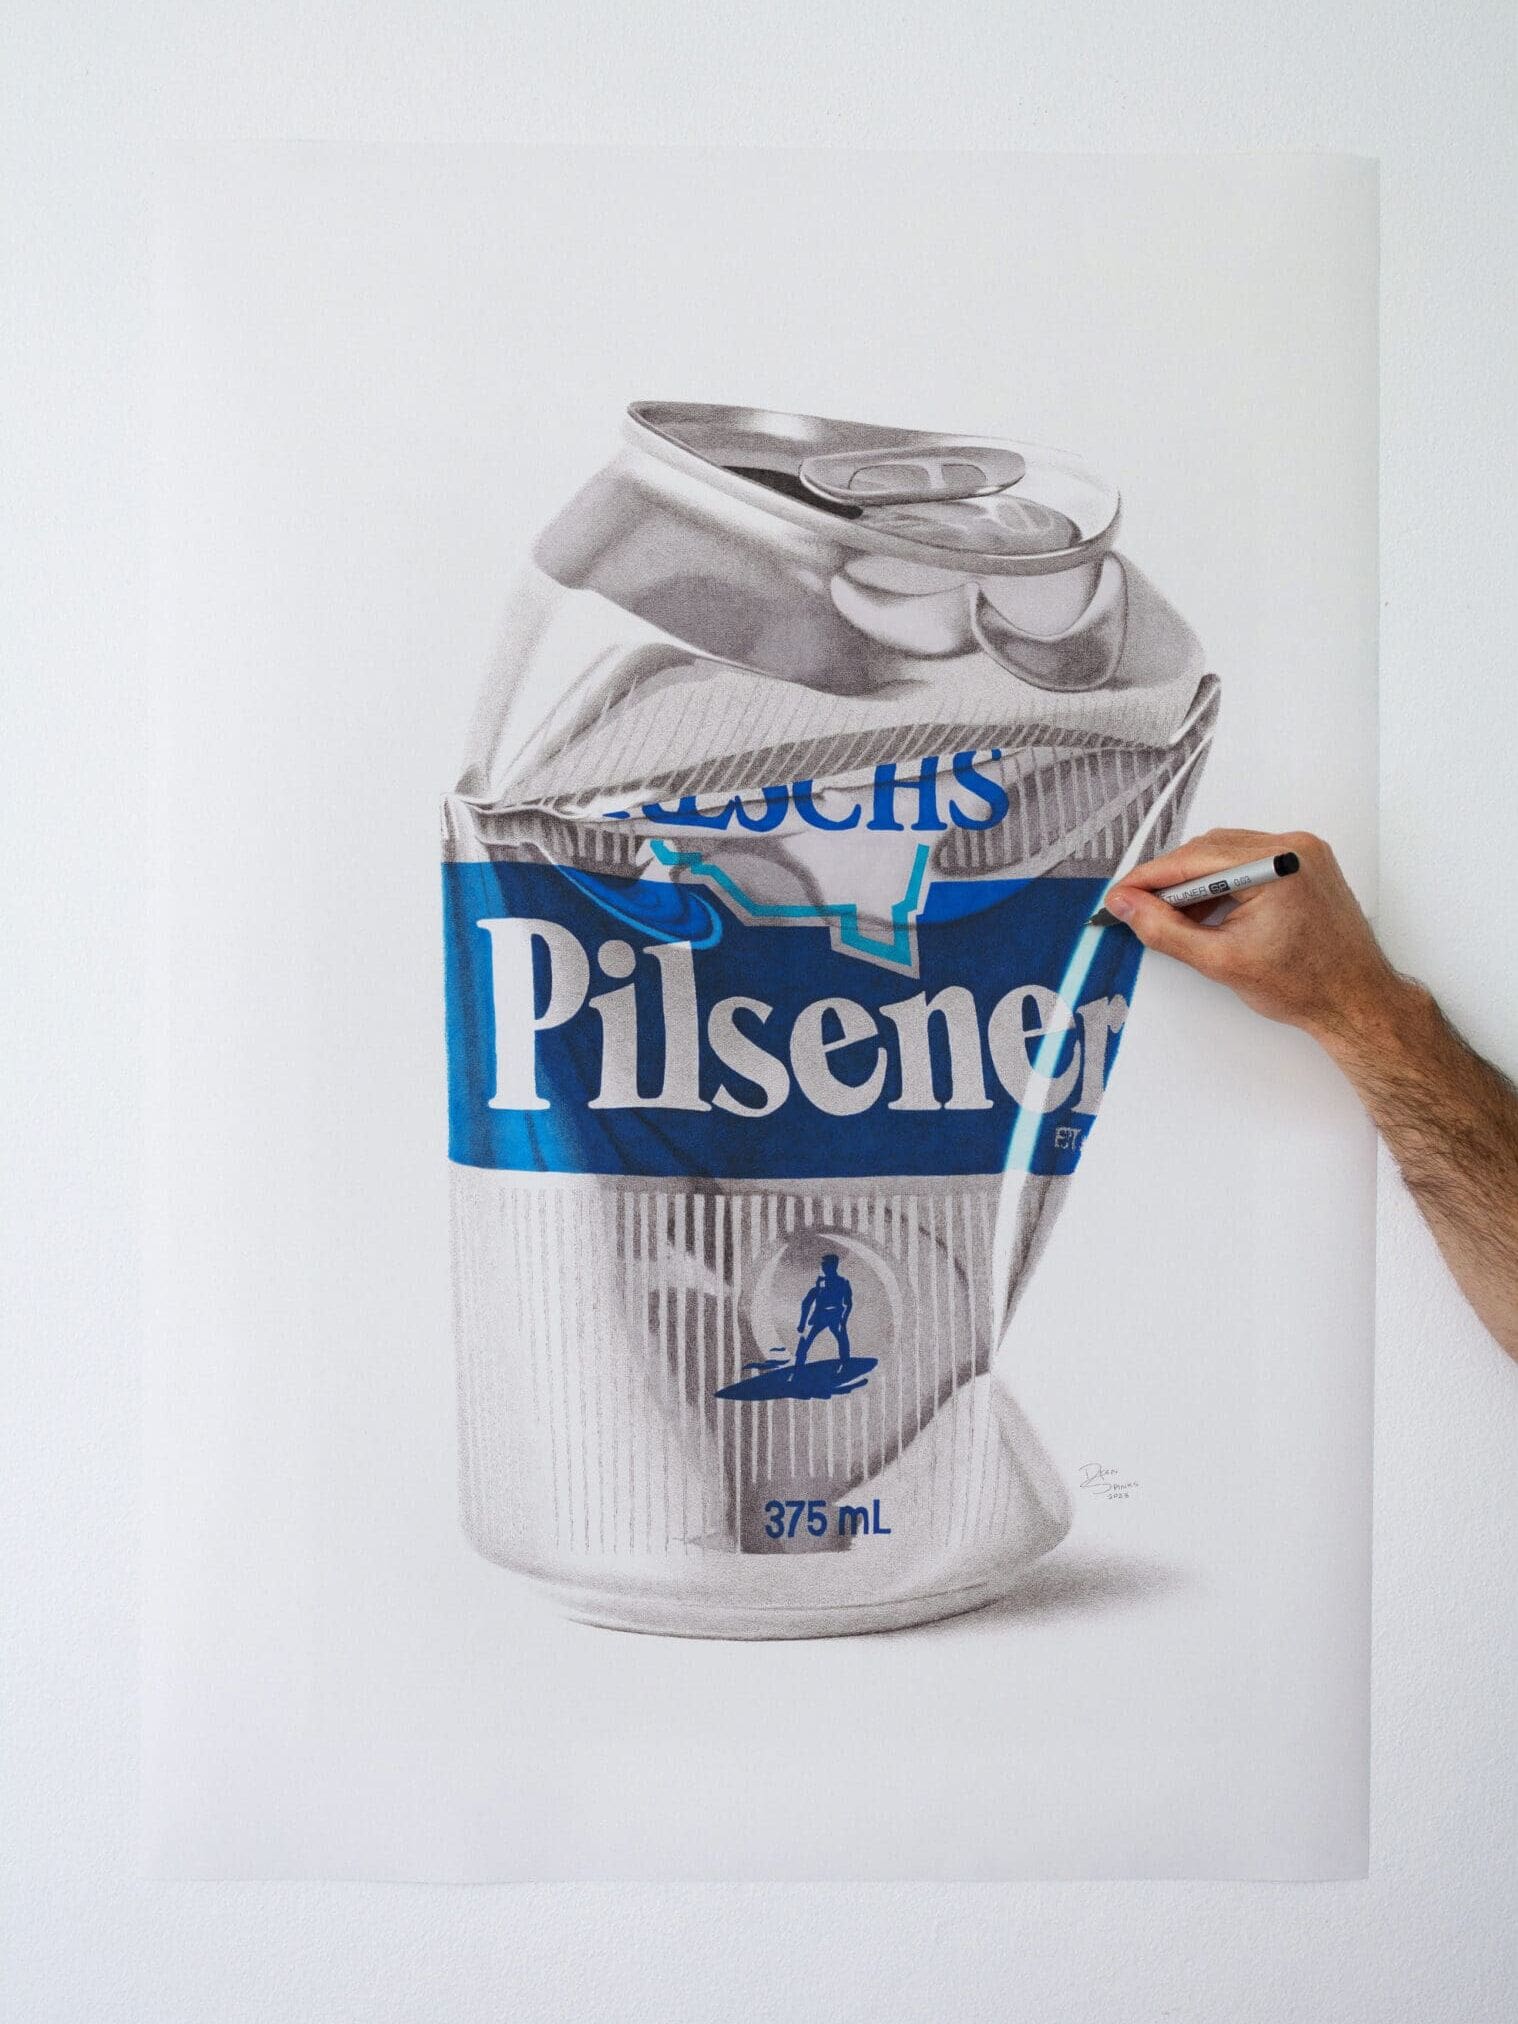 Hand drawn Reschs Pilsener beer can artwork with Copic Marker